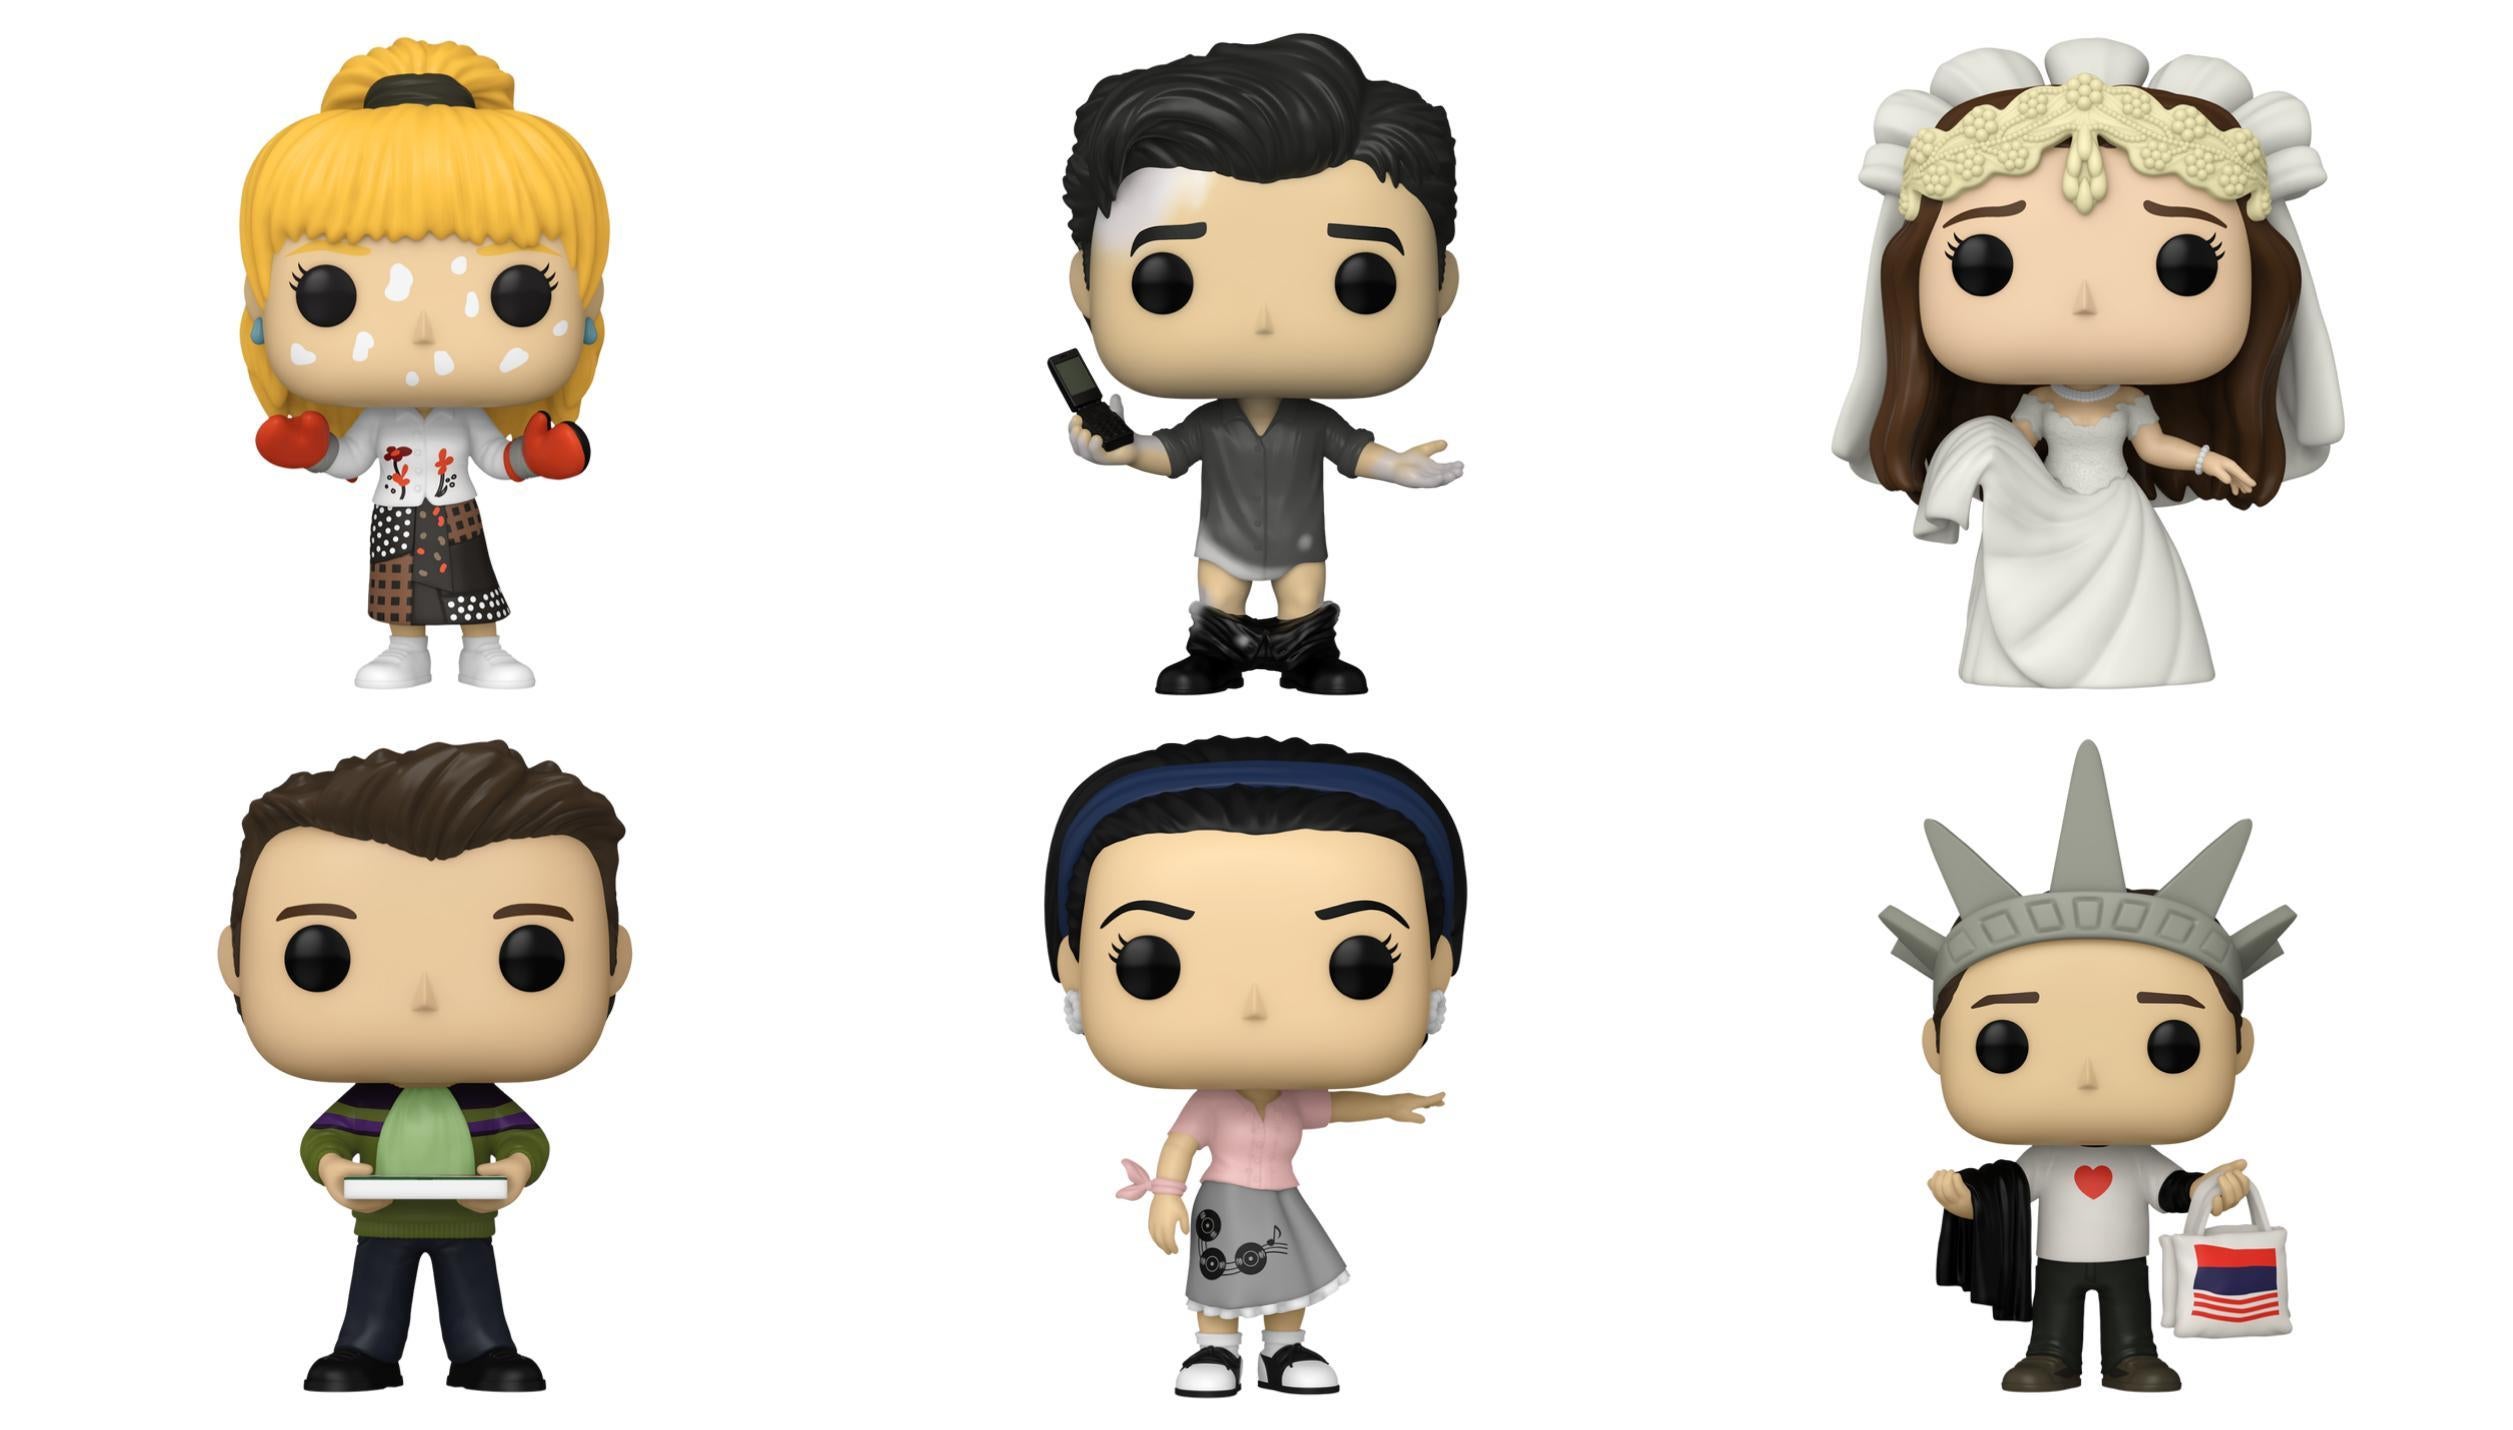 These 17 Funko Pops are majorly discounted right now at